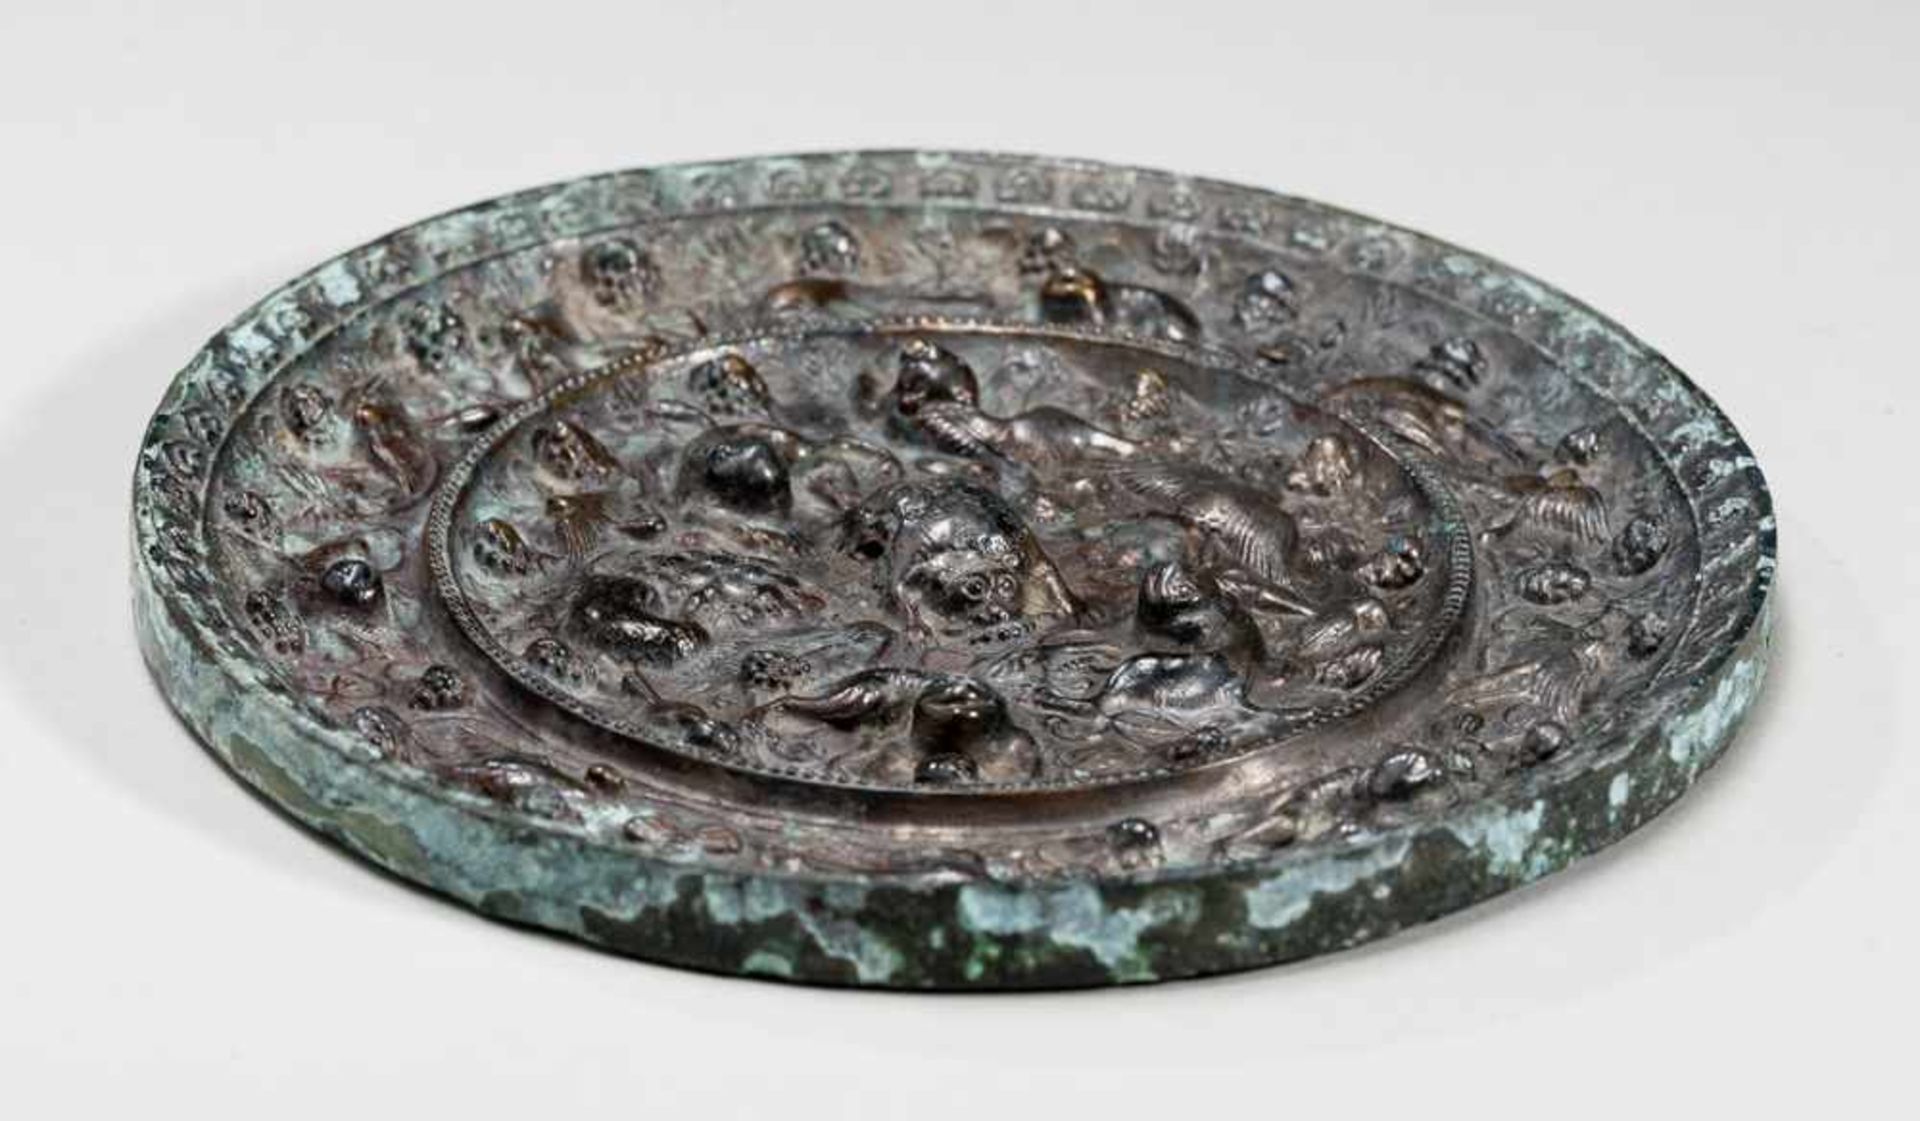 MIRROR RICHLY ORNAMENTED WITH ANIMALS Bronze. China, Tang dynasty (618 - 907)瑞獸銅鏡Decorated in a very - Image 3 of 3